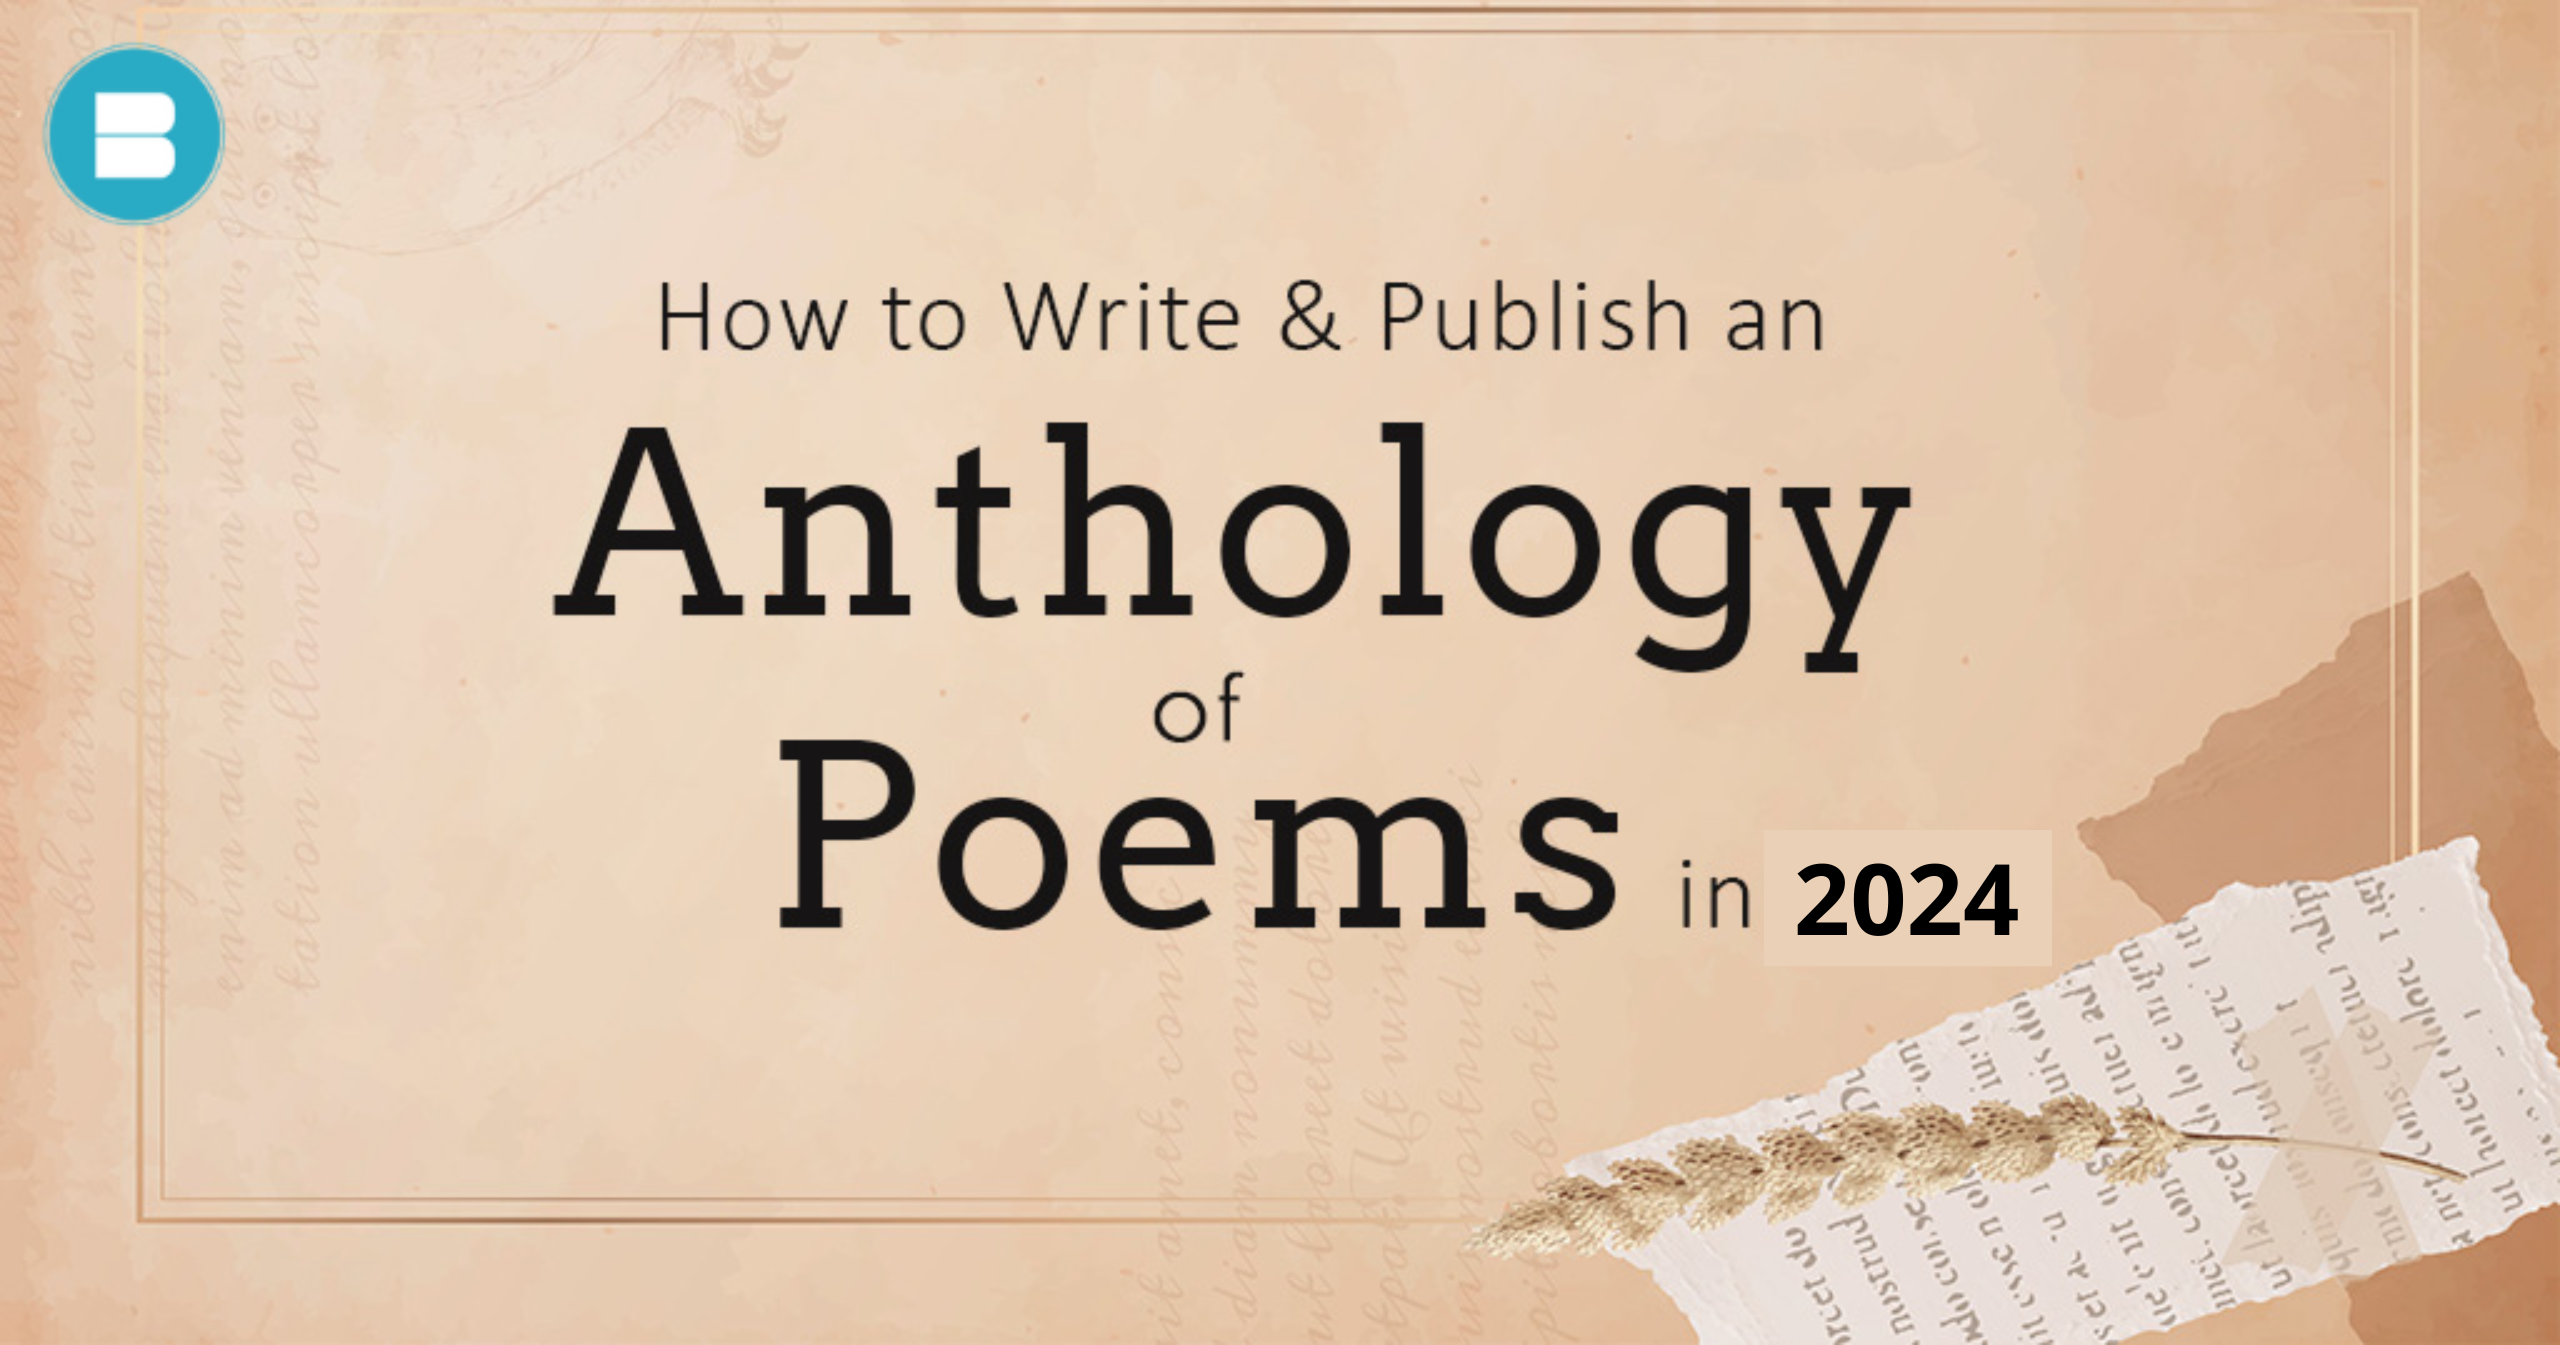 How to Write & Publish an Anthologies of Poems in 2024